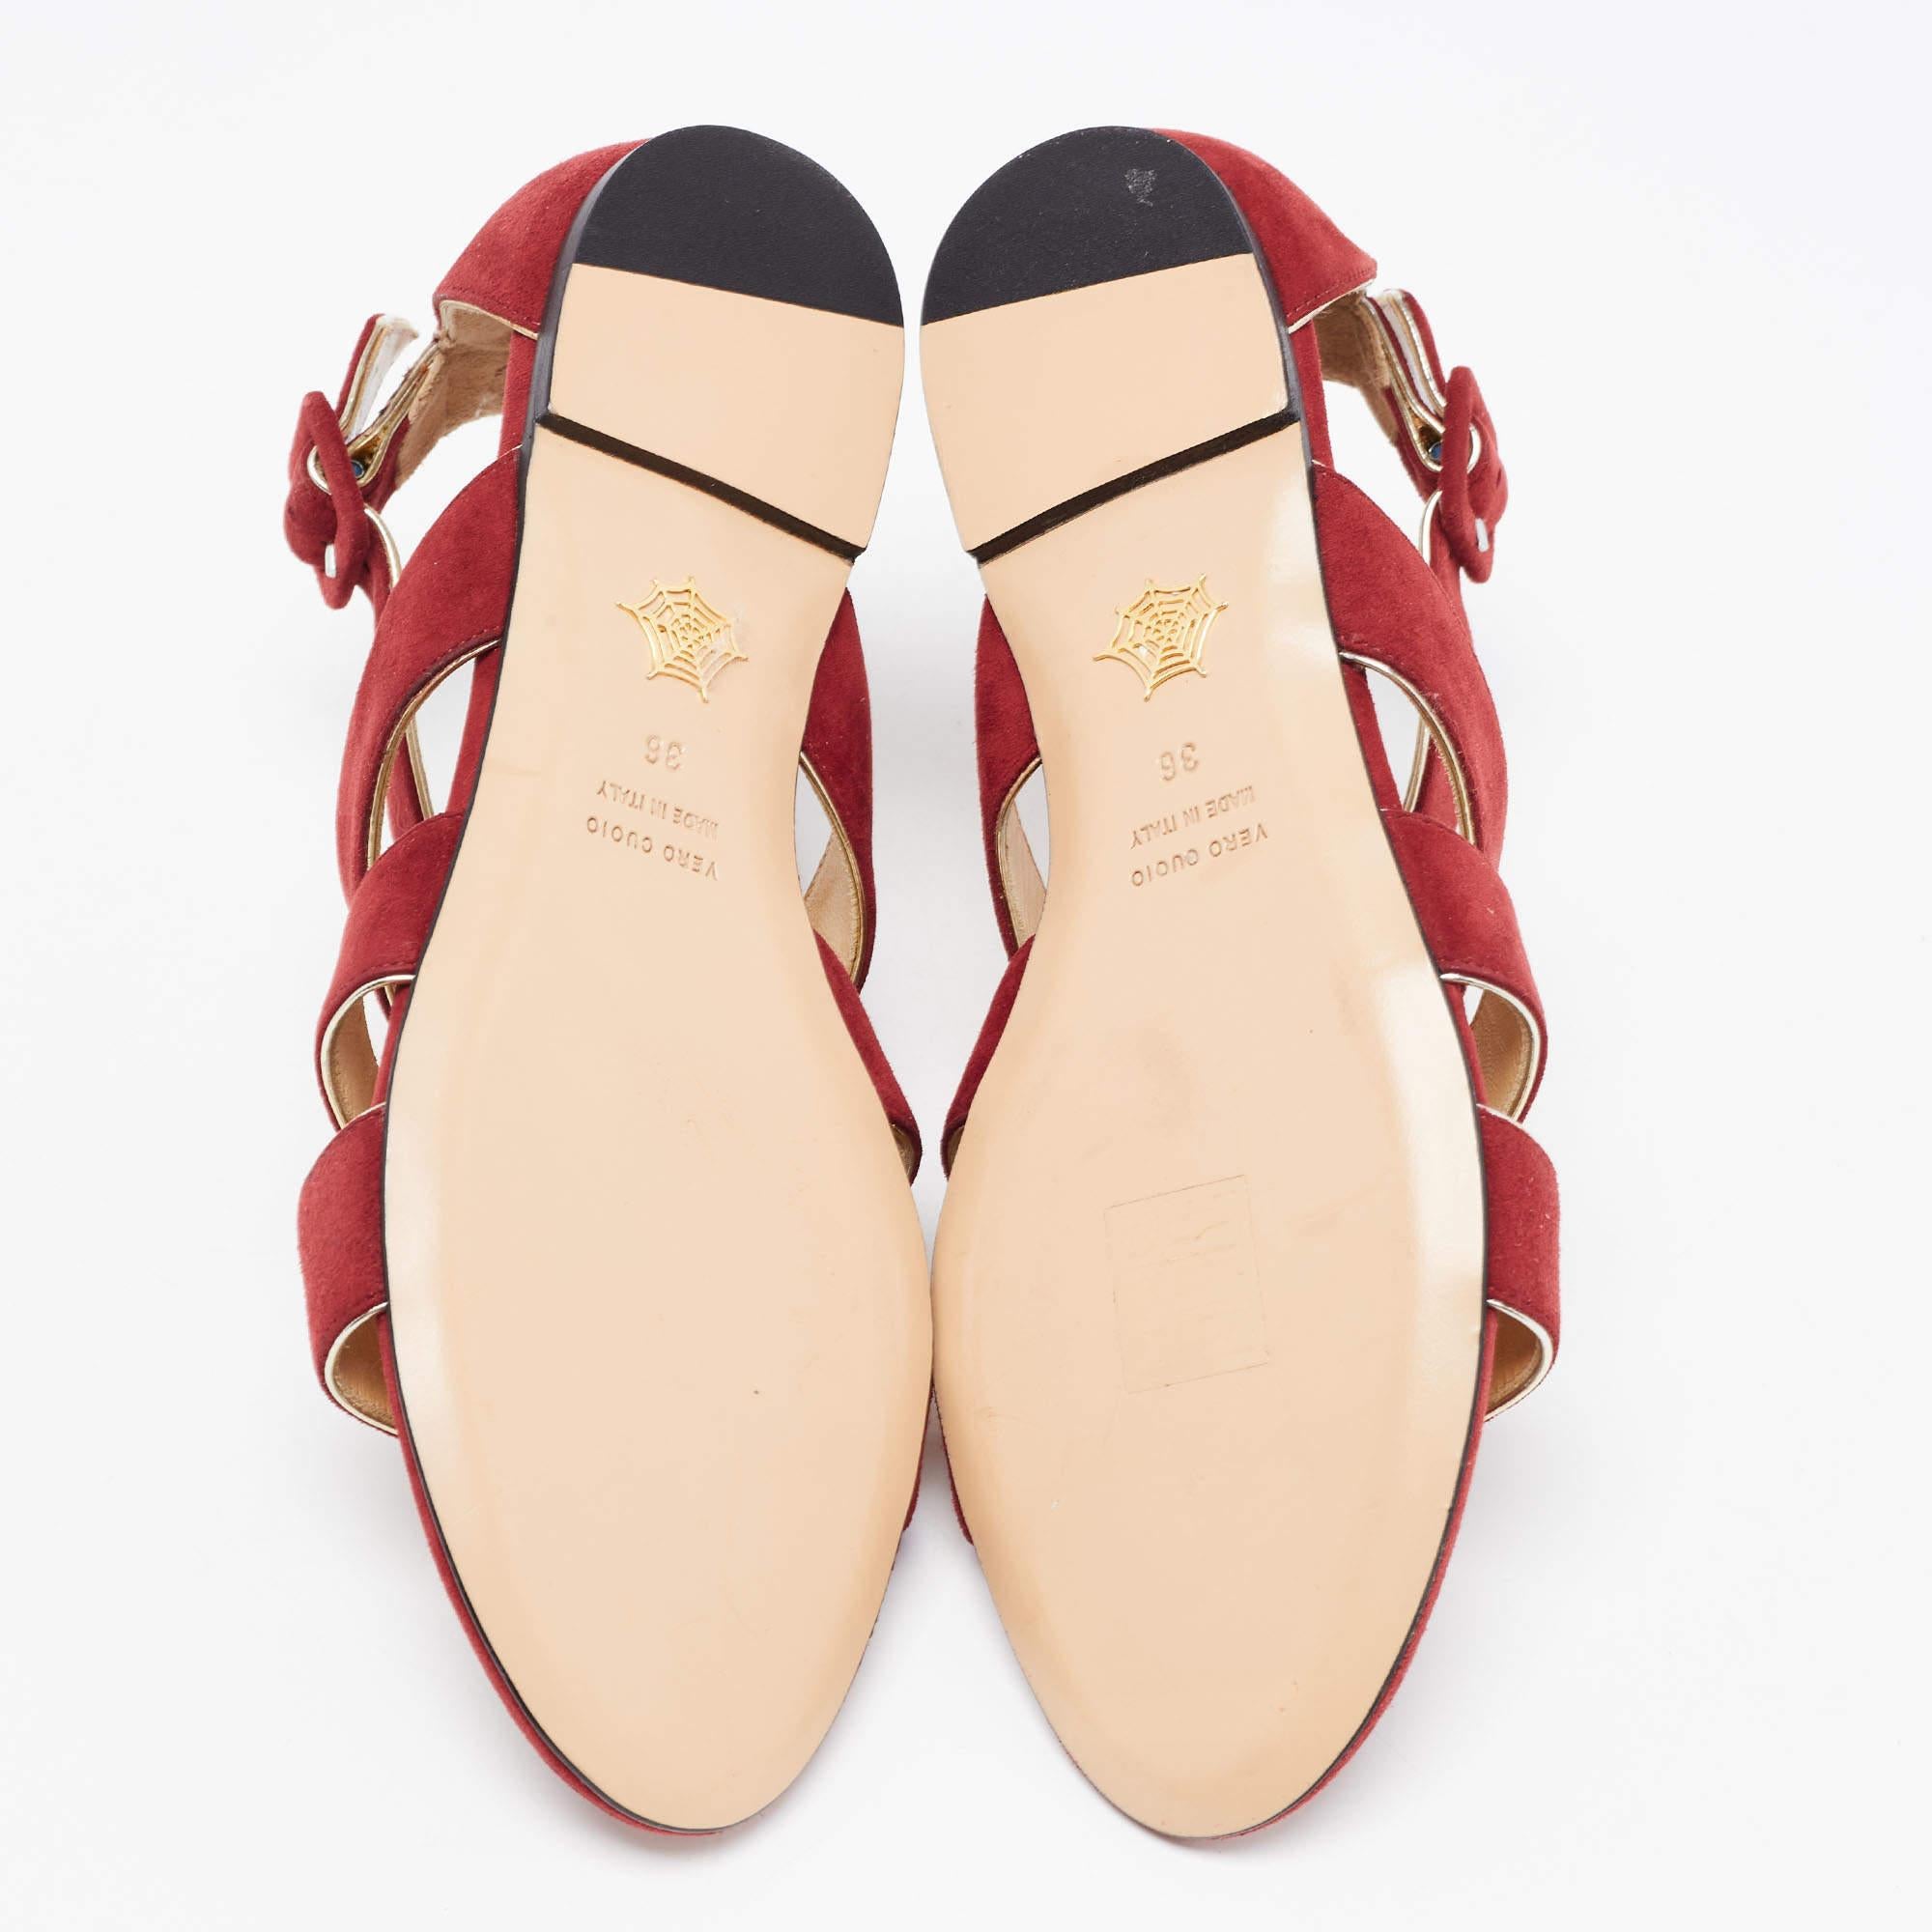 Charlotte Olympia Sandales plates « One More Kiss » en daim rouge grenat taille 36 4